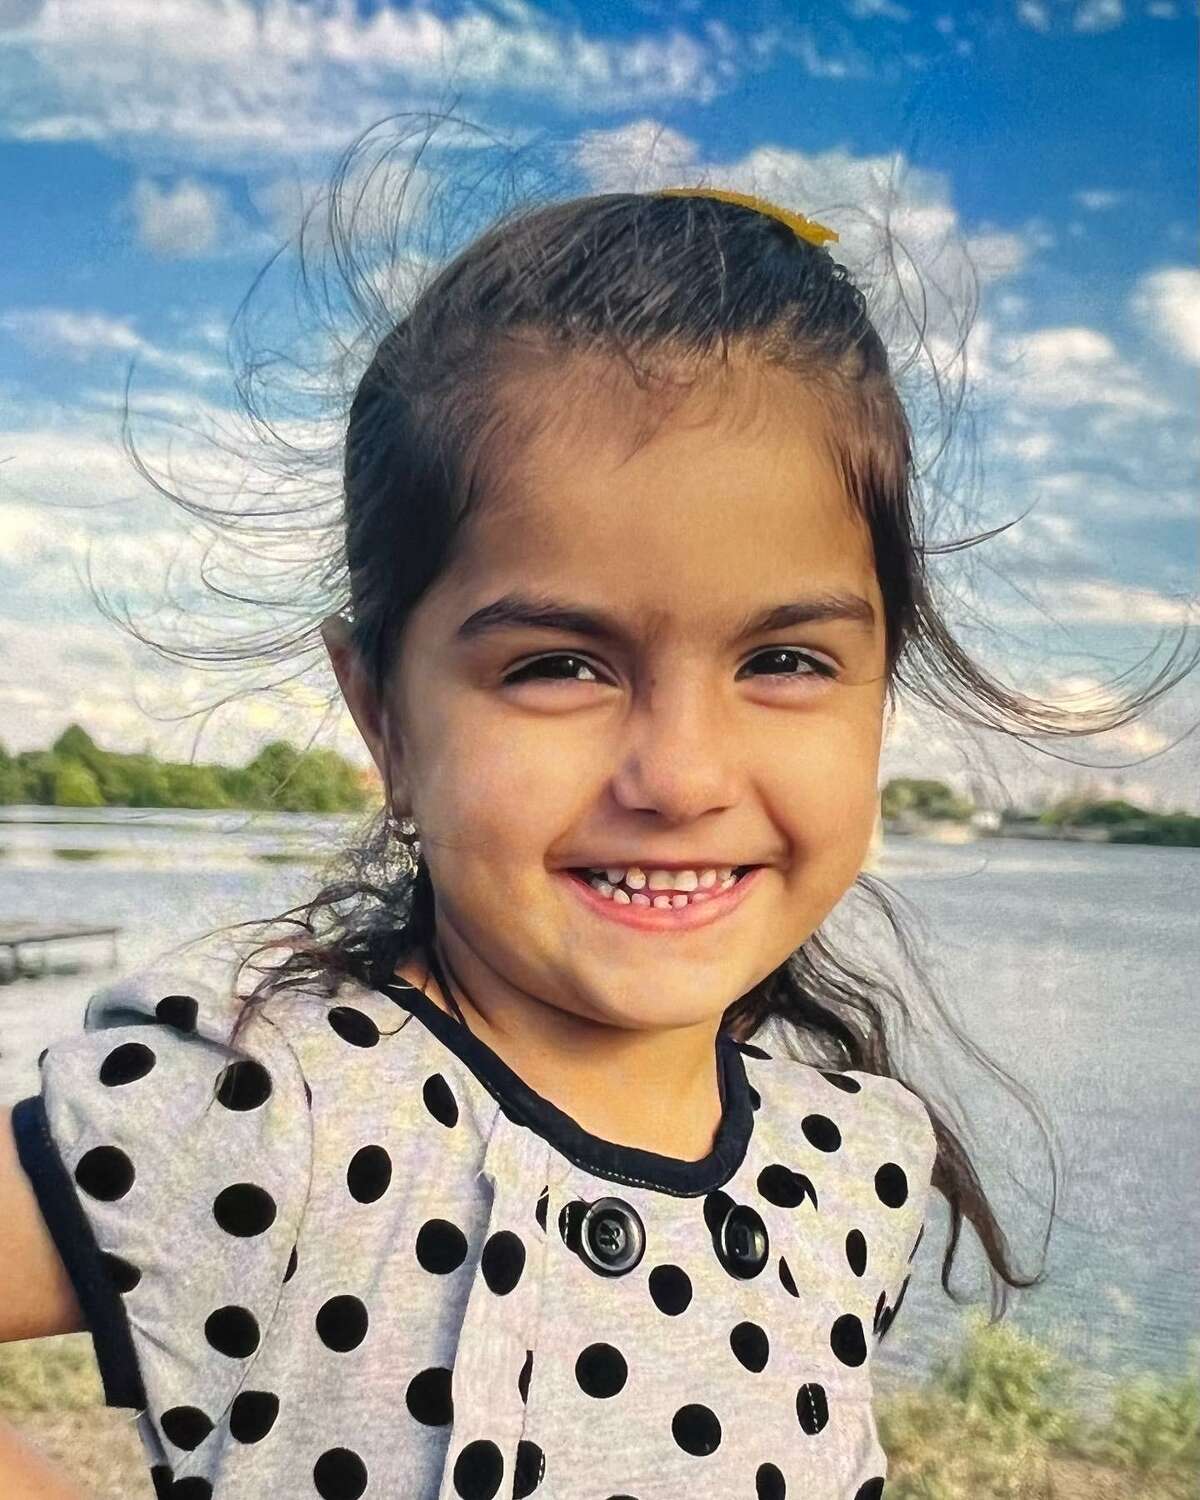 Lina Sardar Khil, 3, was reported missing on Dec. 20. The FBI has identified an 18-minute gap from the time she was last seen on video until her family noticed she was no longer on the playground at their gated apartment complex.